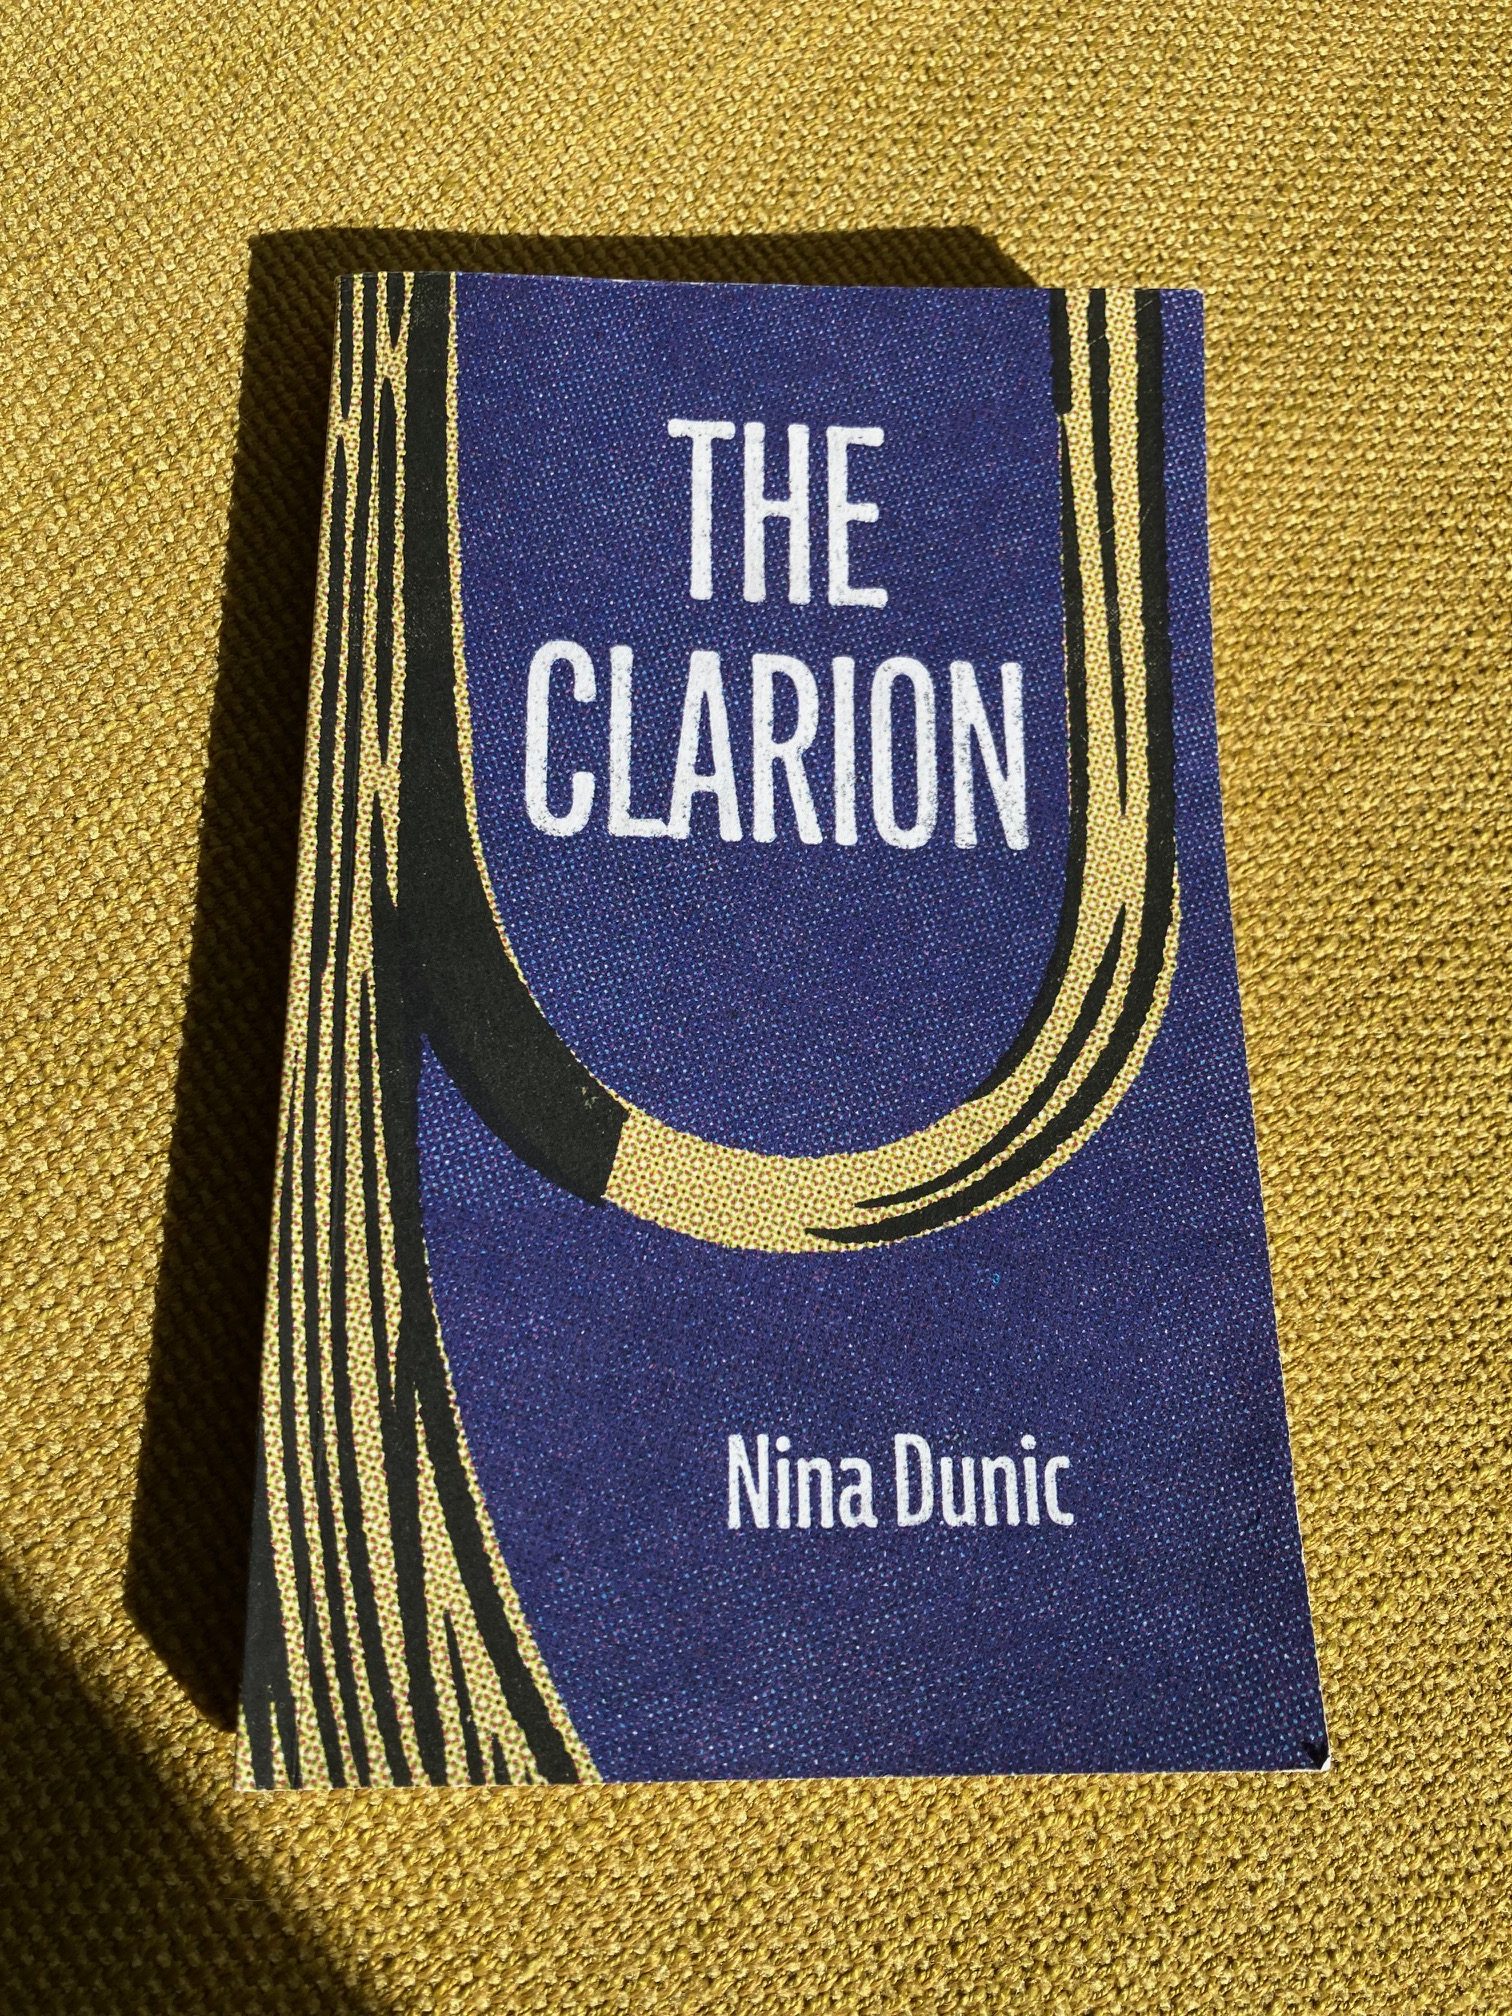 The Clarion by Nina Dunic book pictured on a yellow background